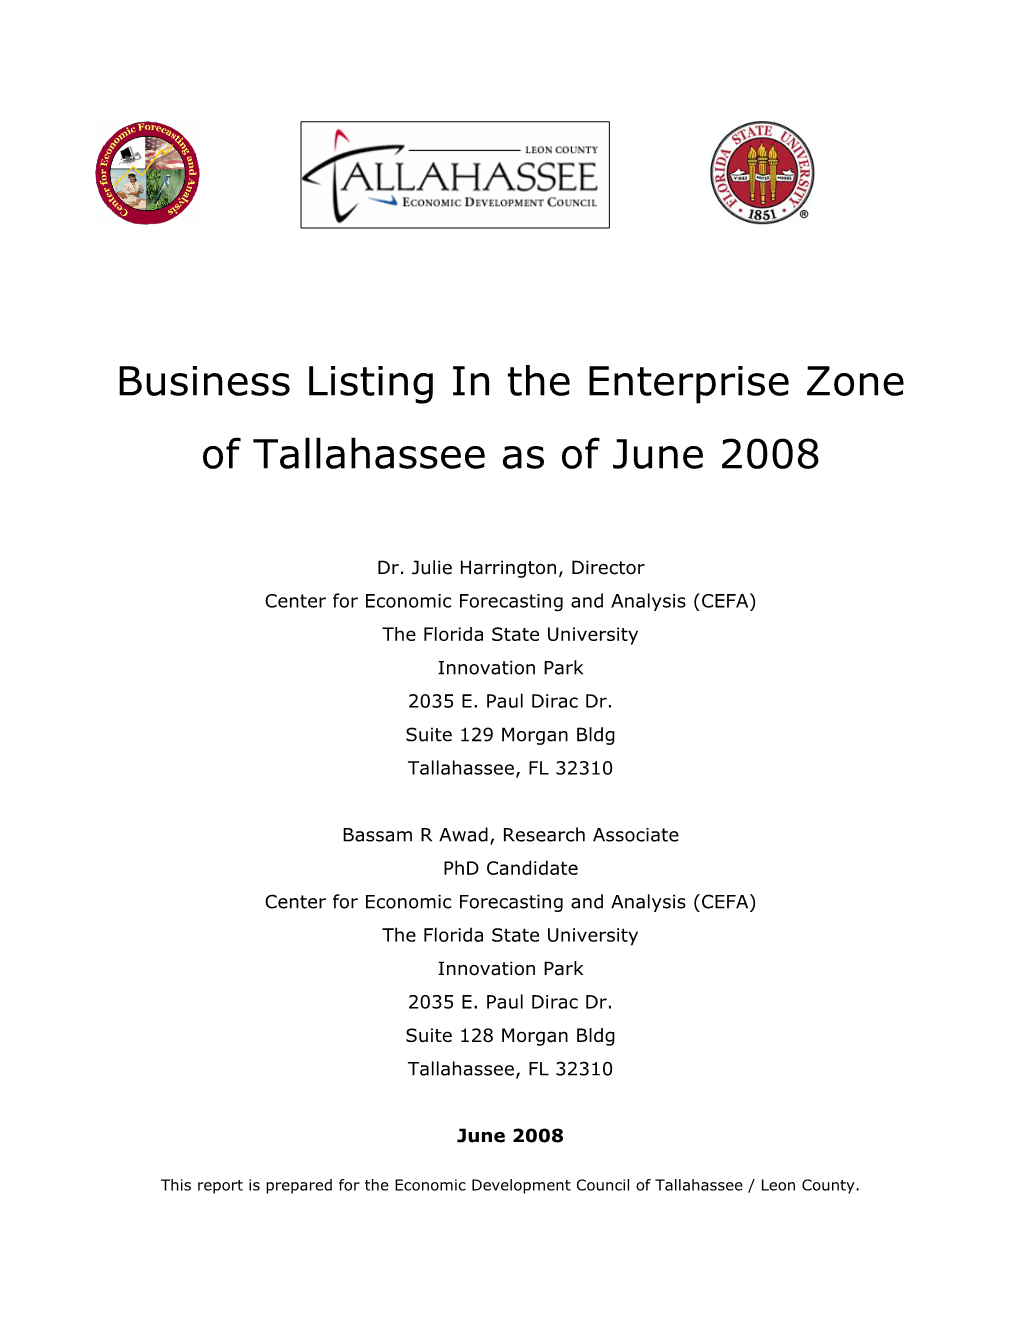 Business Listing in the Enterprise Zone of Tallahassee As of June 2008